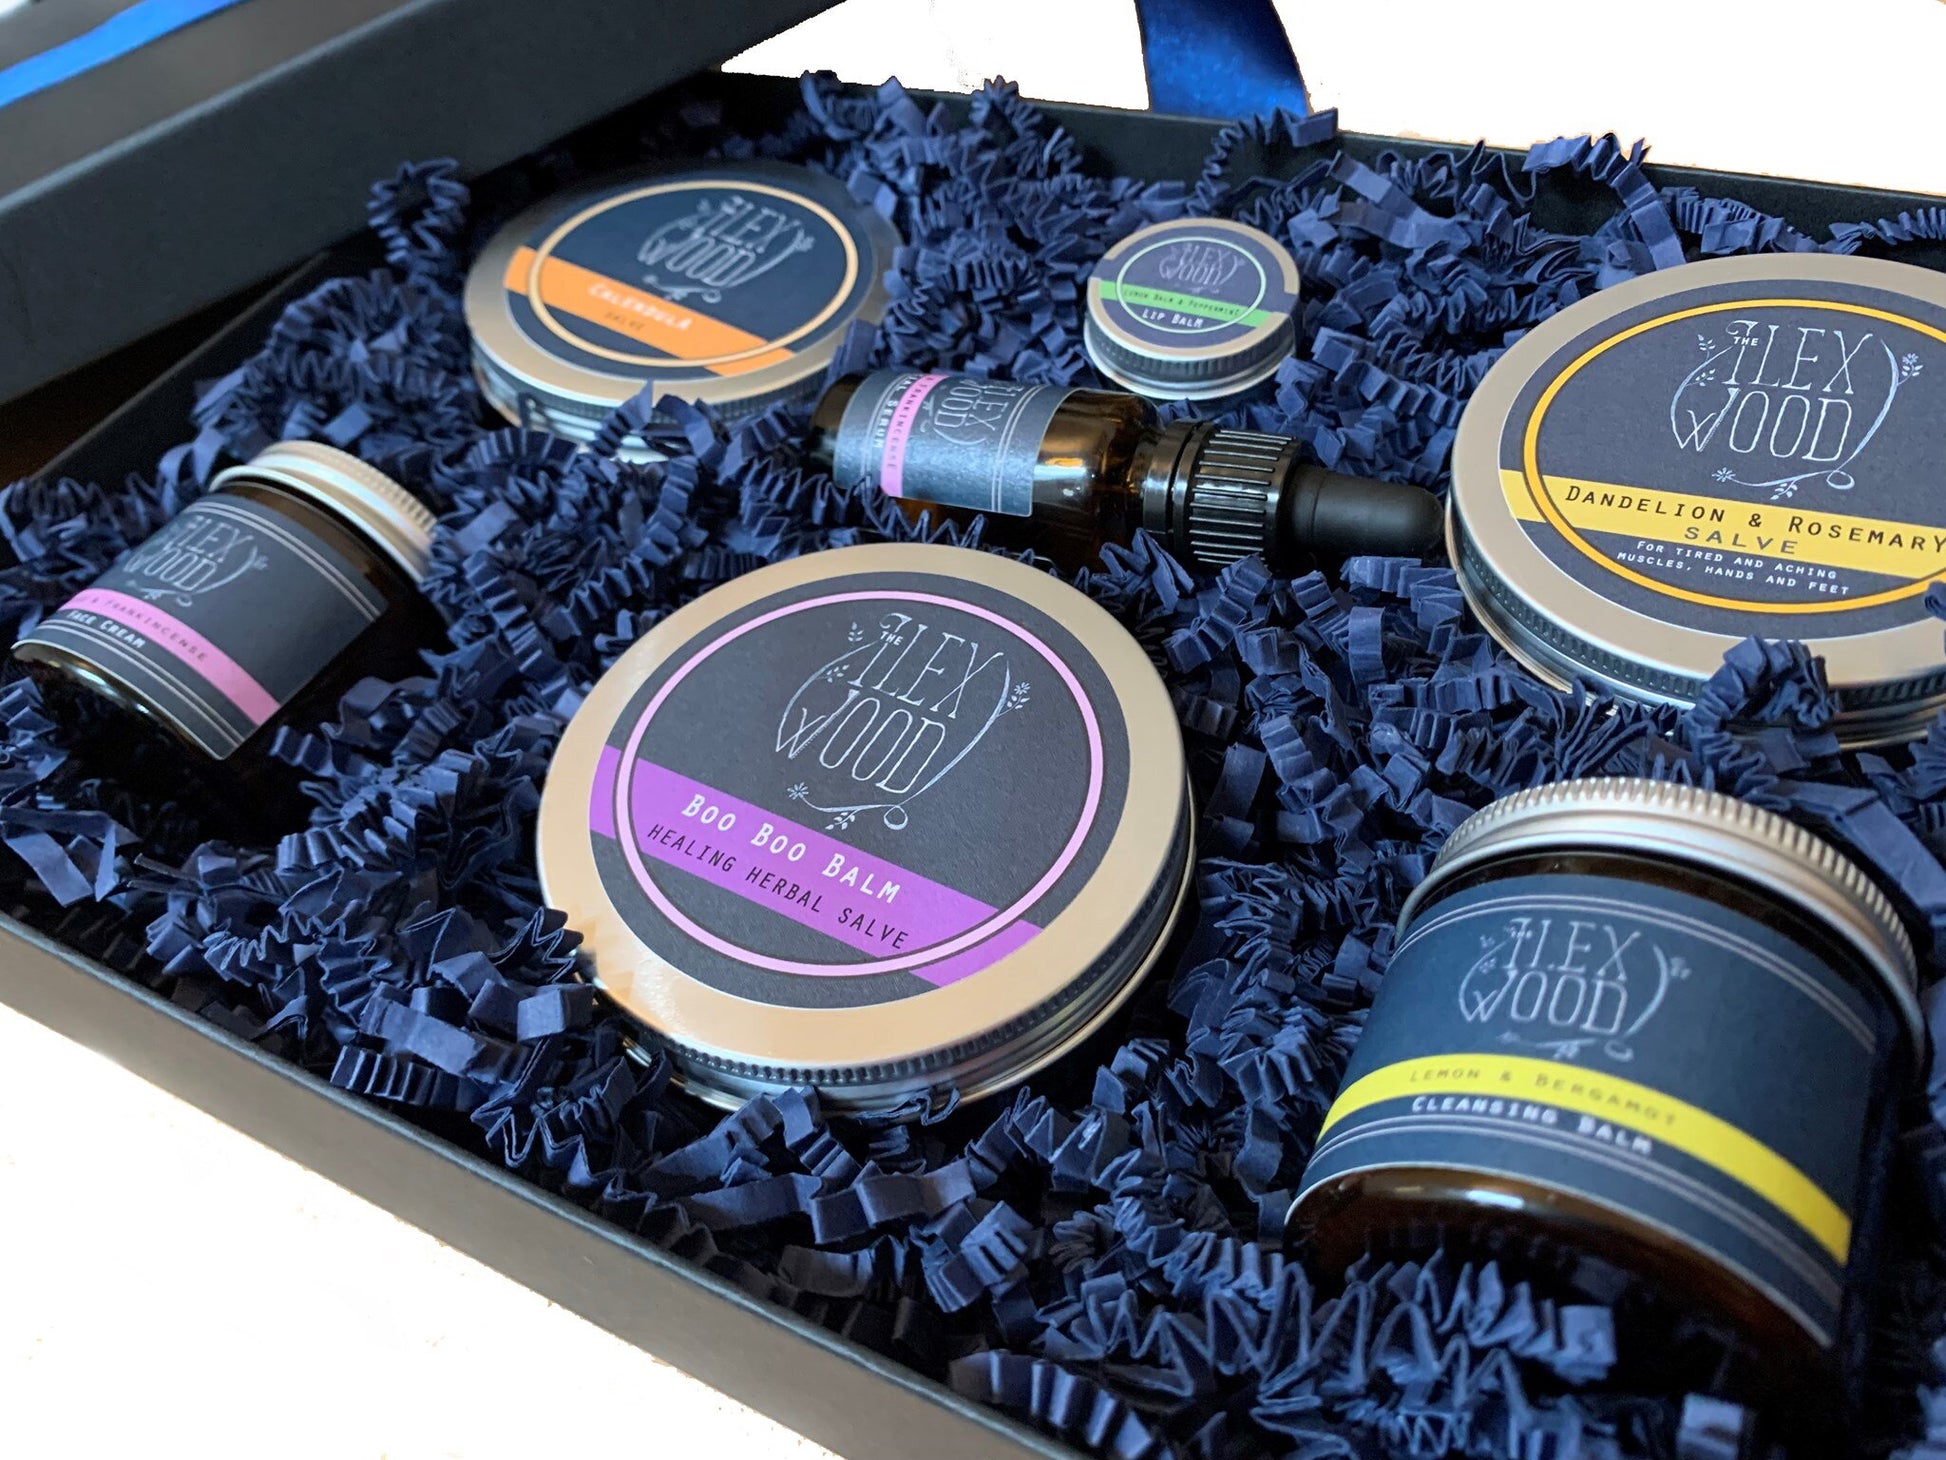 The Ultimate Plus Natural Beauty Skin Care Gift Box